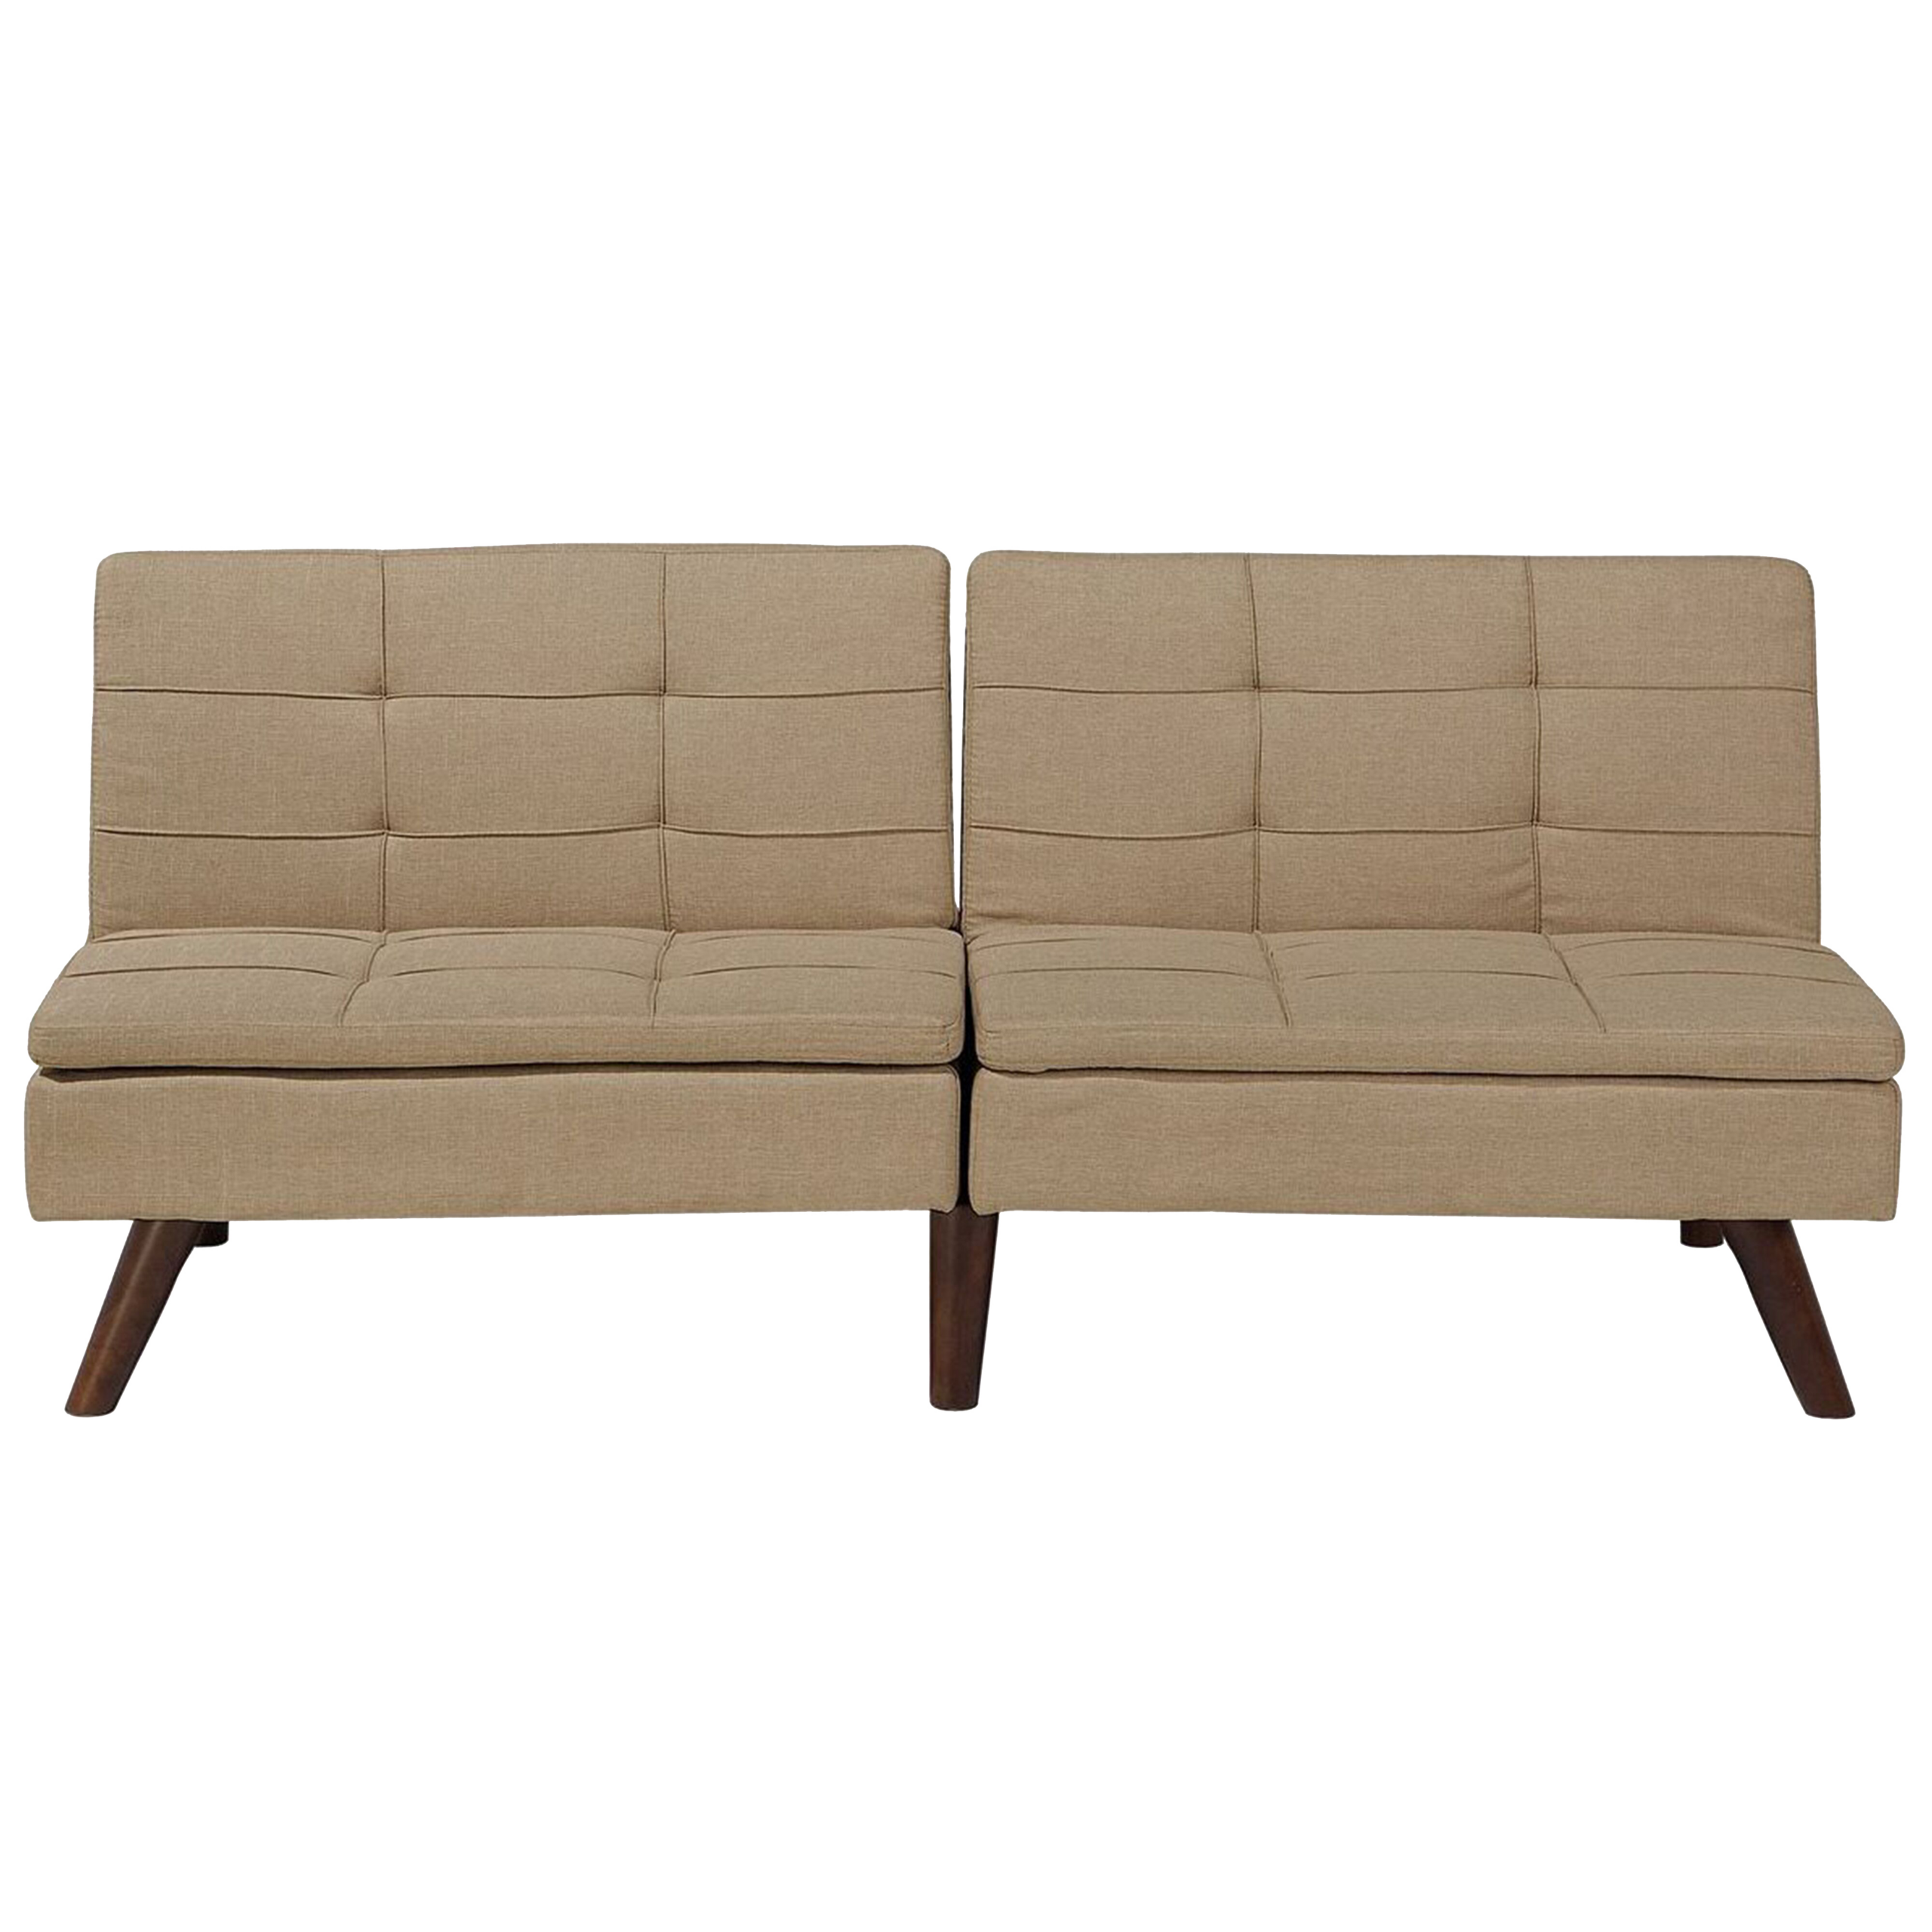 Beliani Sofa Bed Light Brown 3-Seater Quilted Upholstery Click Clack Split Back Metal Legs